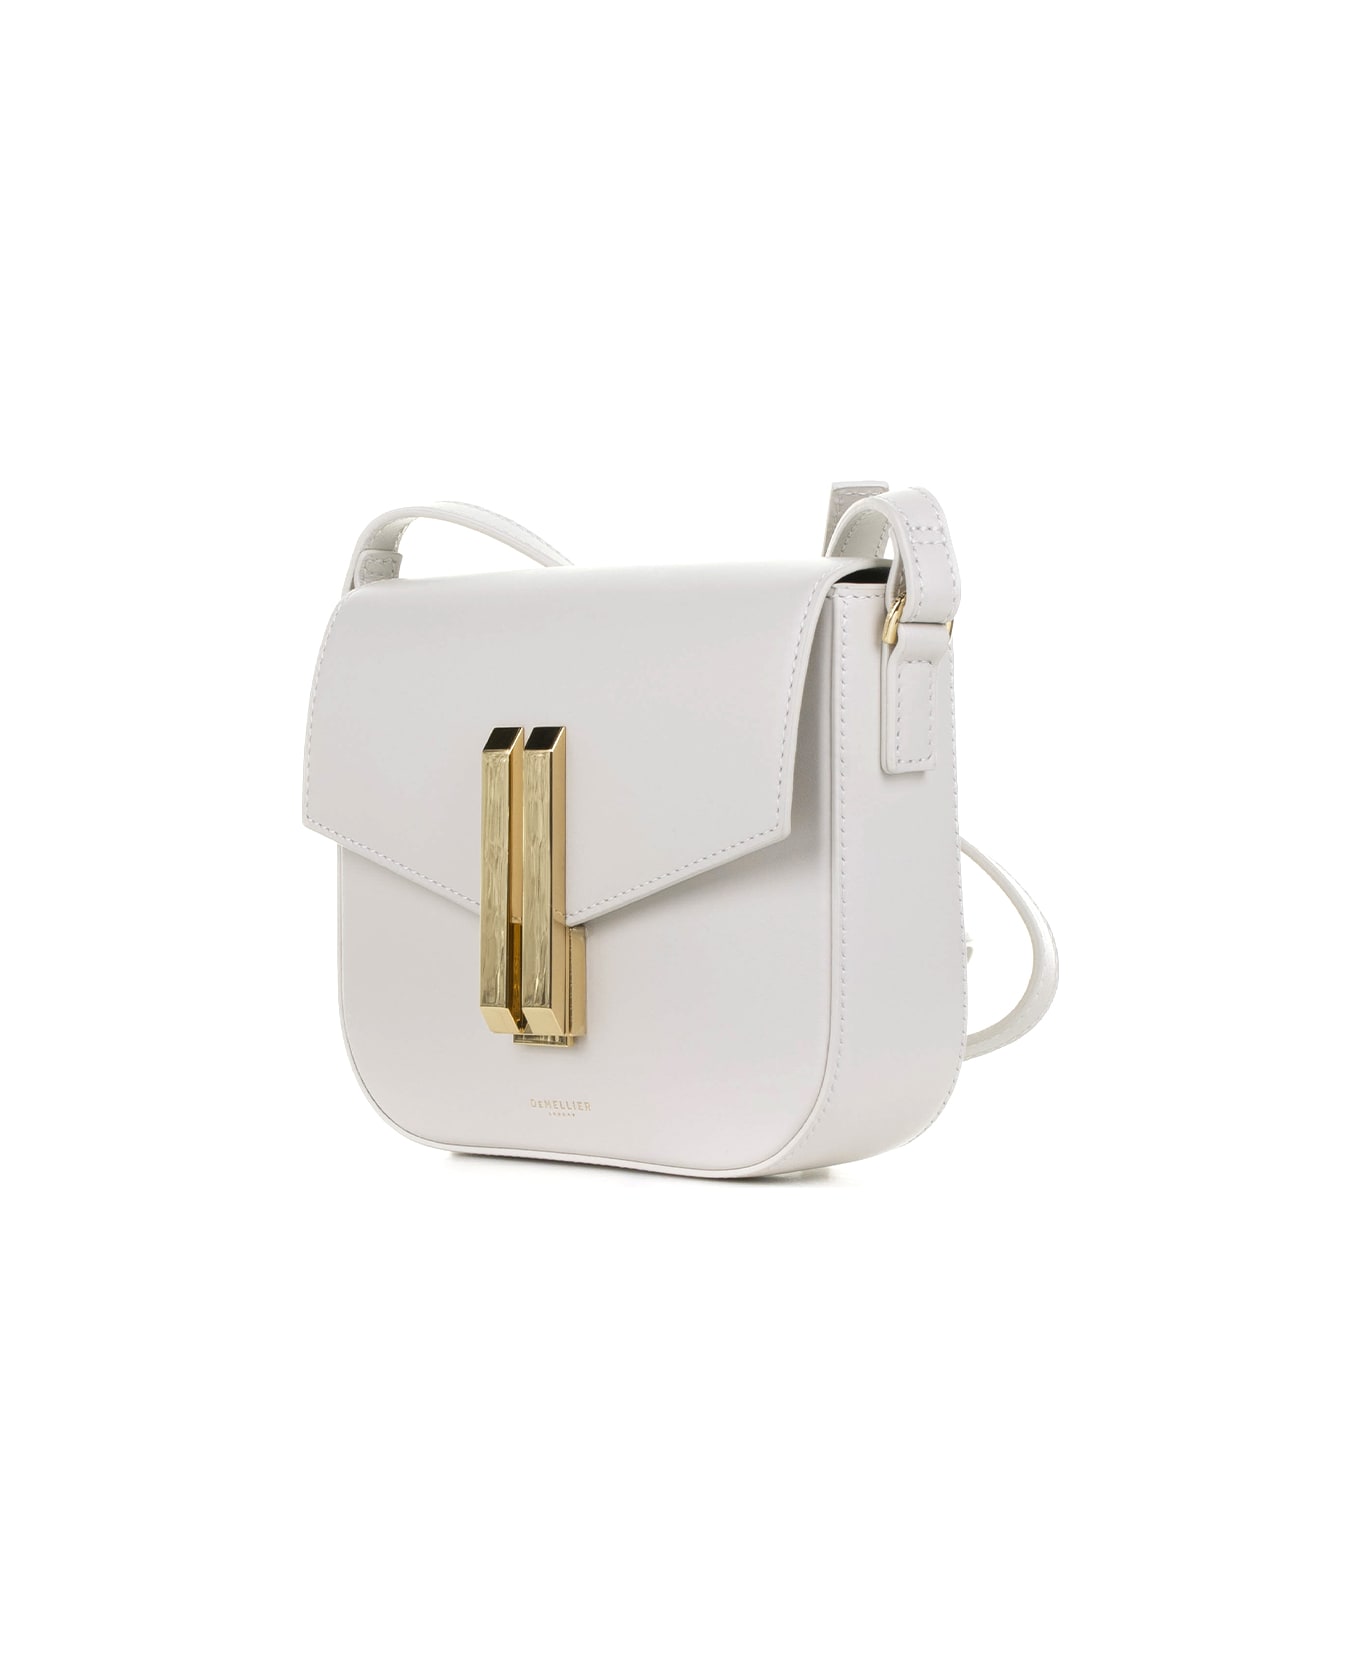 Demellier Vancouver Small Leather Shoulder Bag - OFF WHITE